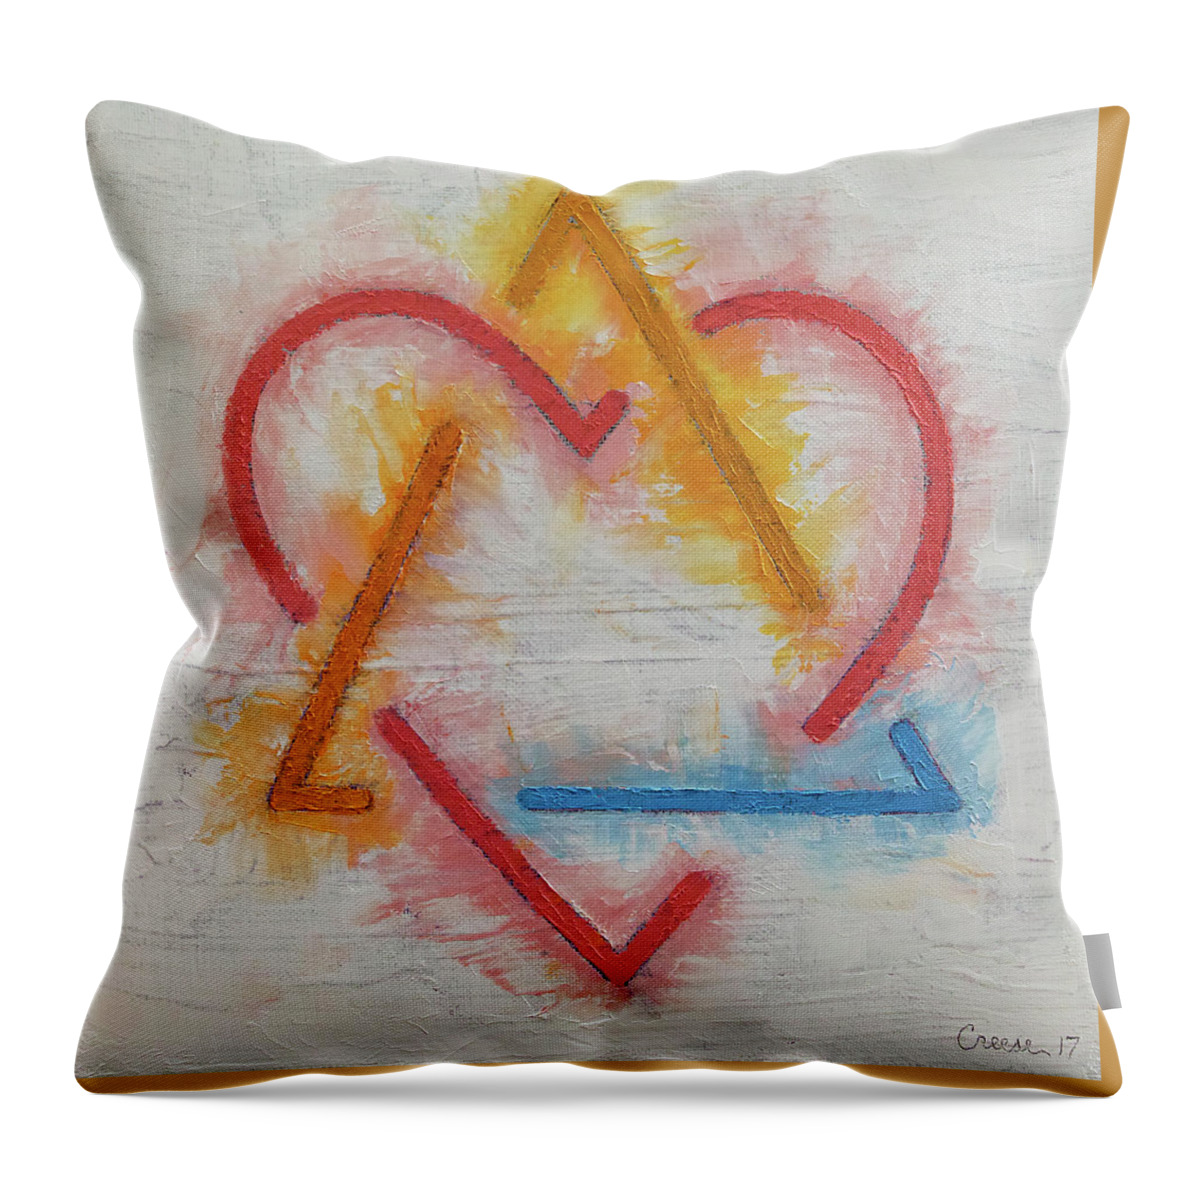 Adoption Symbol Throw Pillow featuring the painting Adoption Symbol by Michael Creese